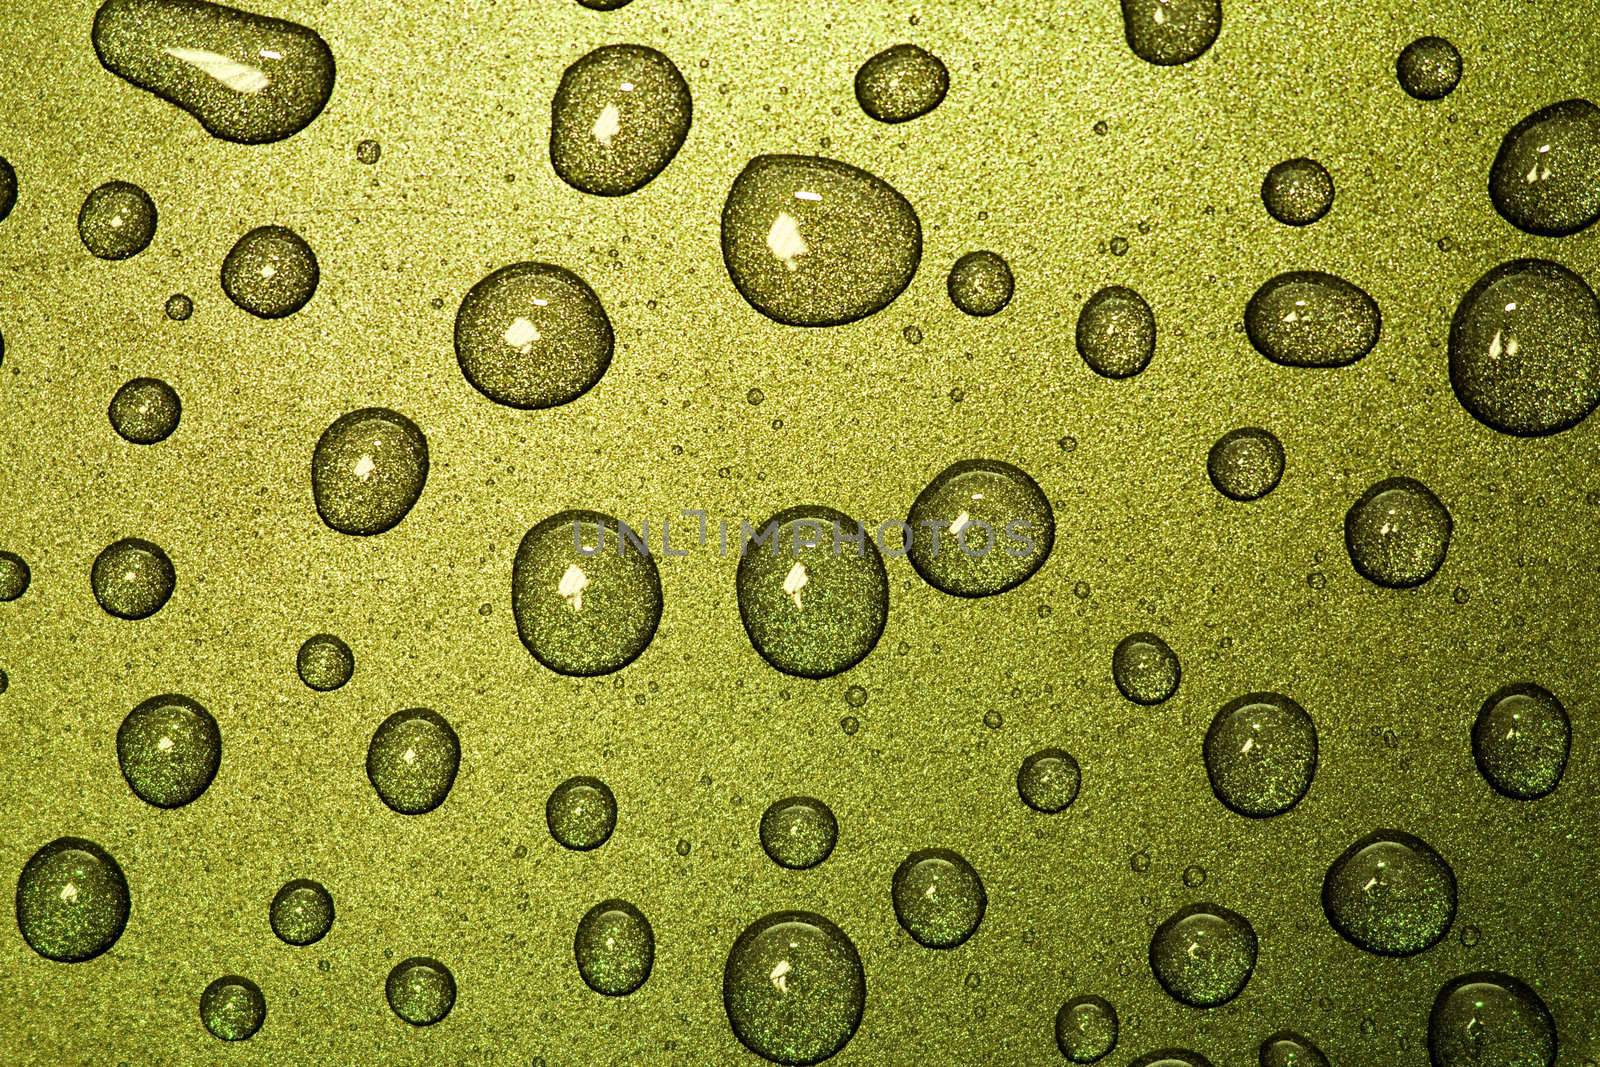 drops of pure water photographed while driving